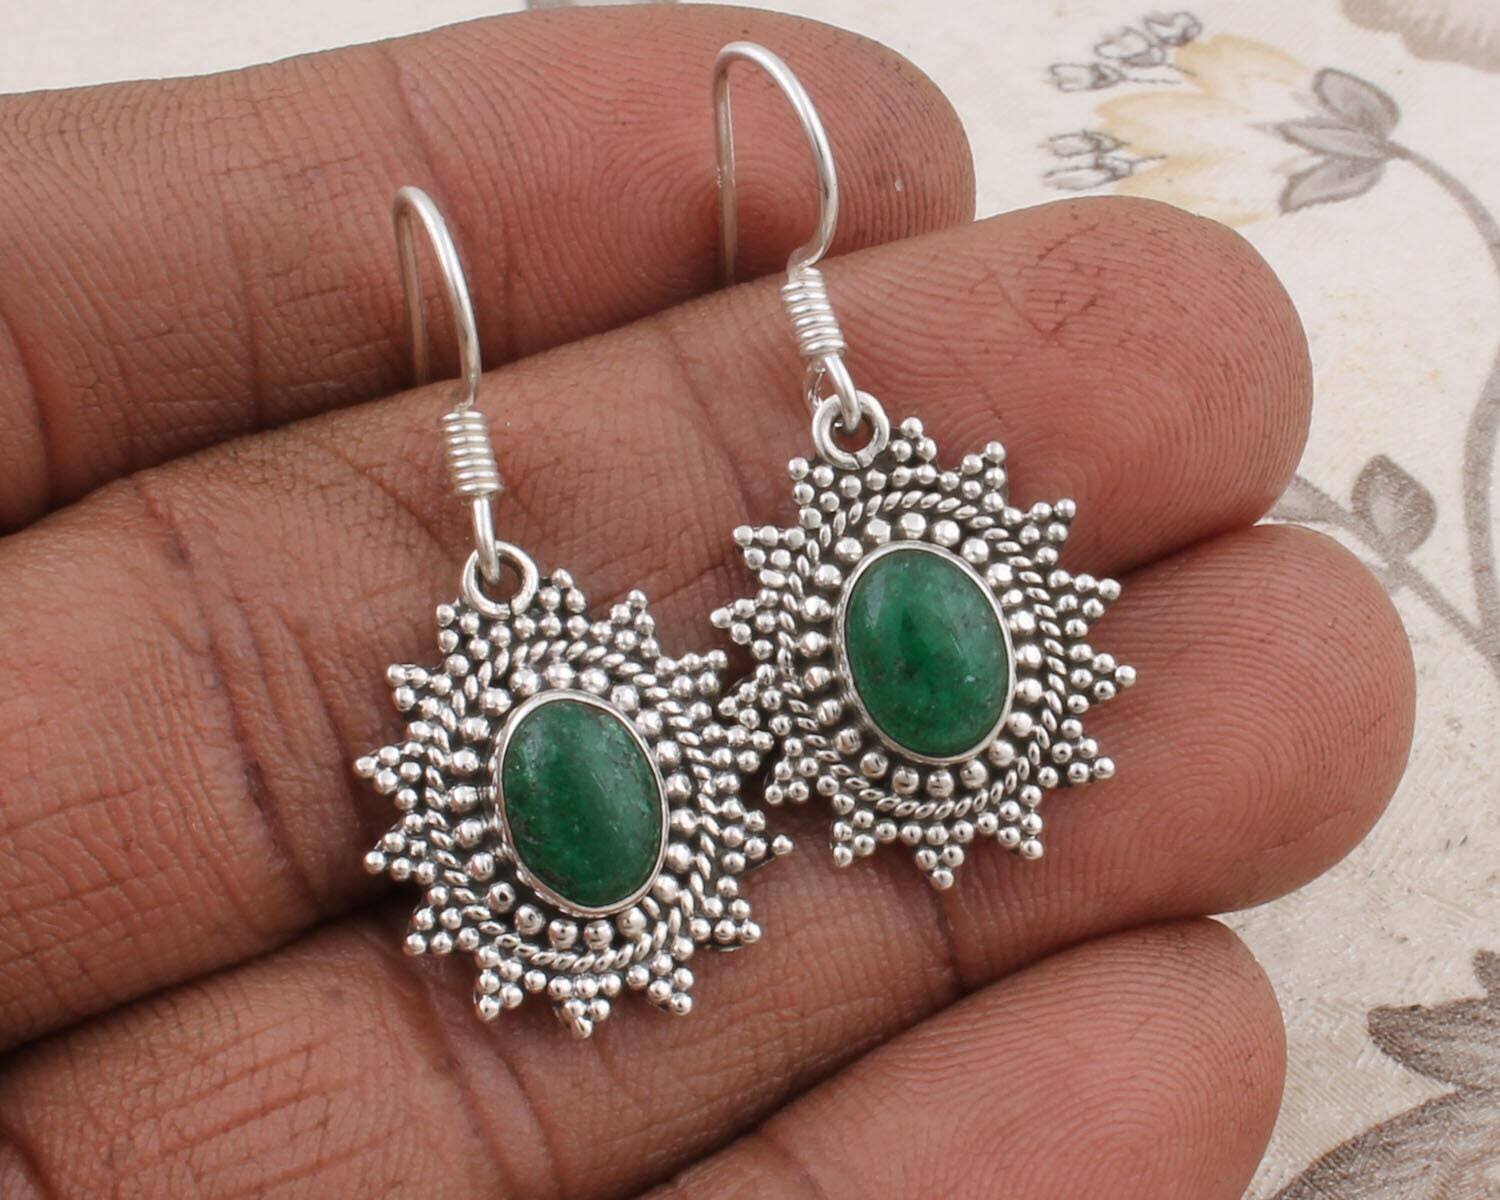 Amazing Emerald Top Quality Gemstone Handmade Earring Cabochon Stone Boho Earring 925-Antique Silver Earring Etsy Cyber Valentine's Day Gift